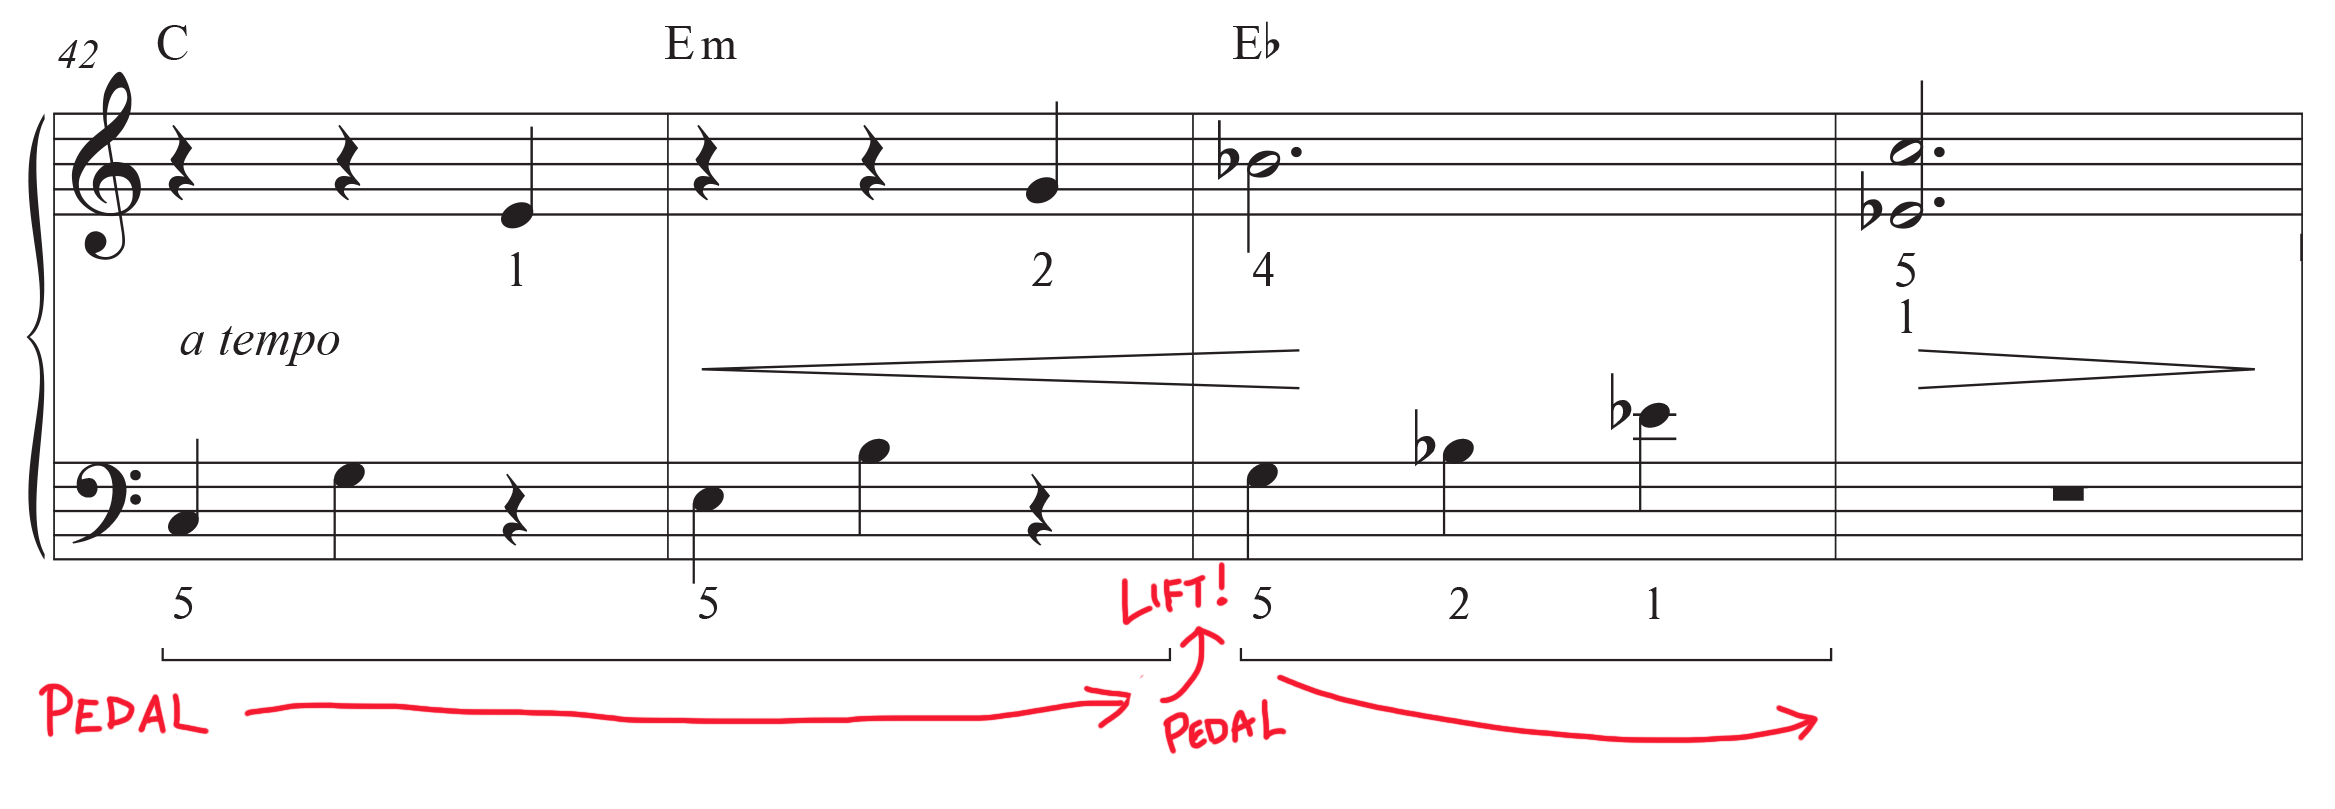 Easy sheet music for Clair de Lune with pedal markings highlighted with red arrows and where they start and end.